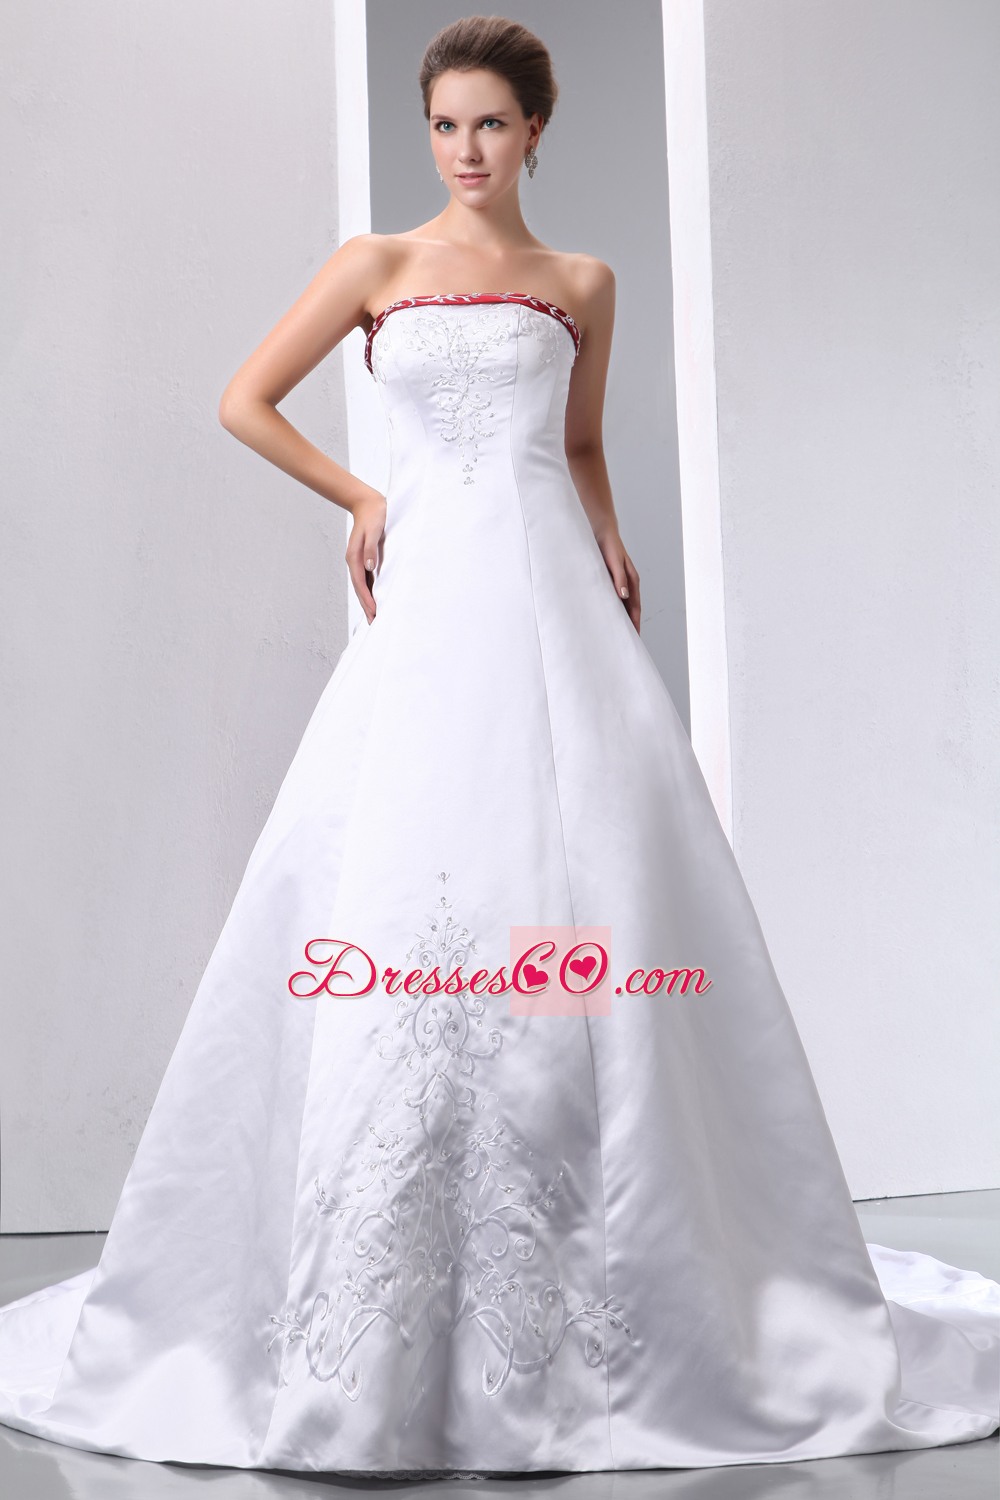 Luxurious A-line Strapless Chapel Train Satin Embroidery With Beading Wedding Dress